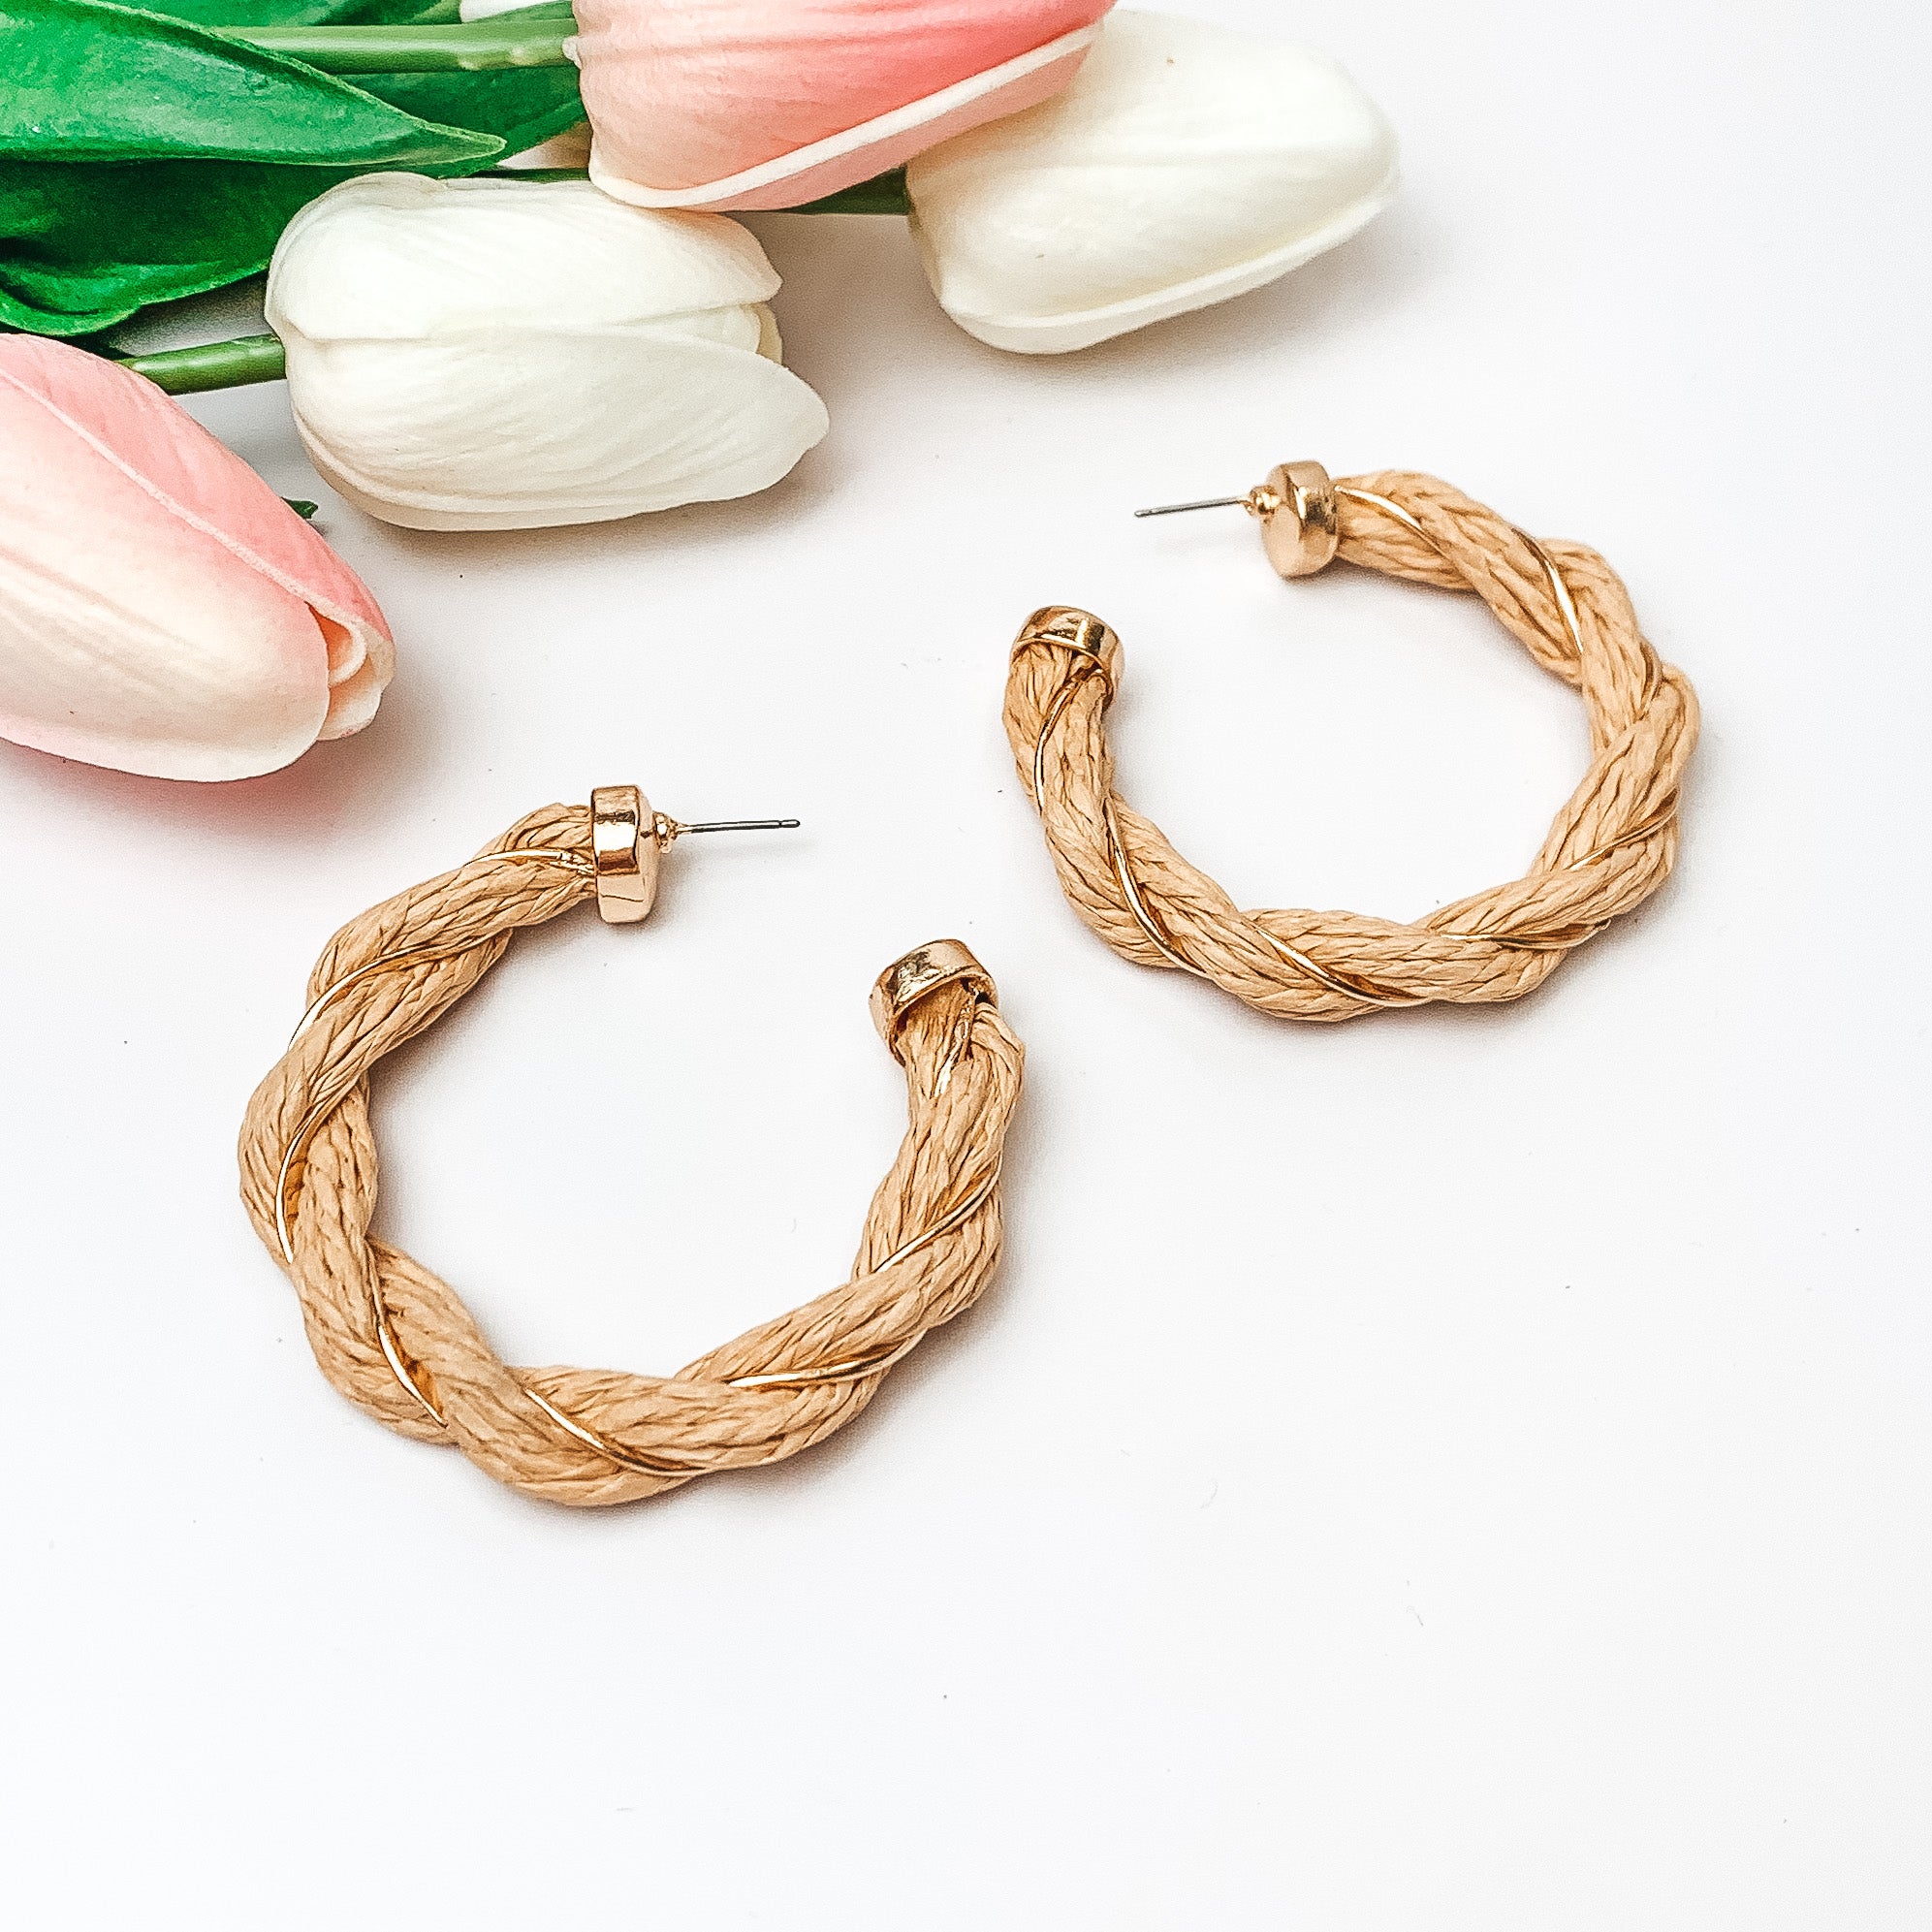 Pictured are beige raffia twisted hoop earrings with gold detailing.  They are pictured with pink and white tulips on a white background.